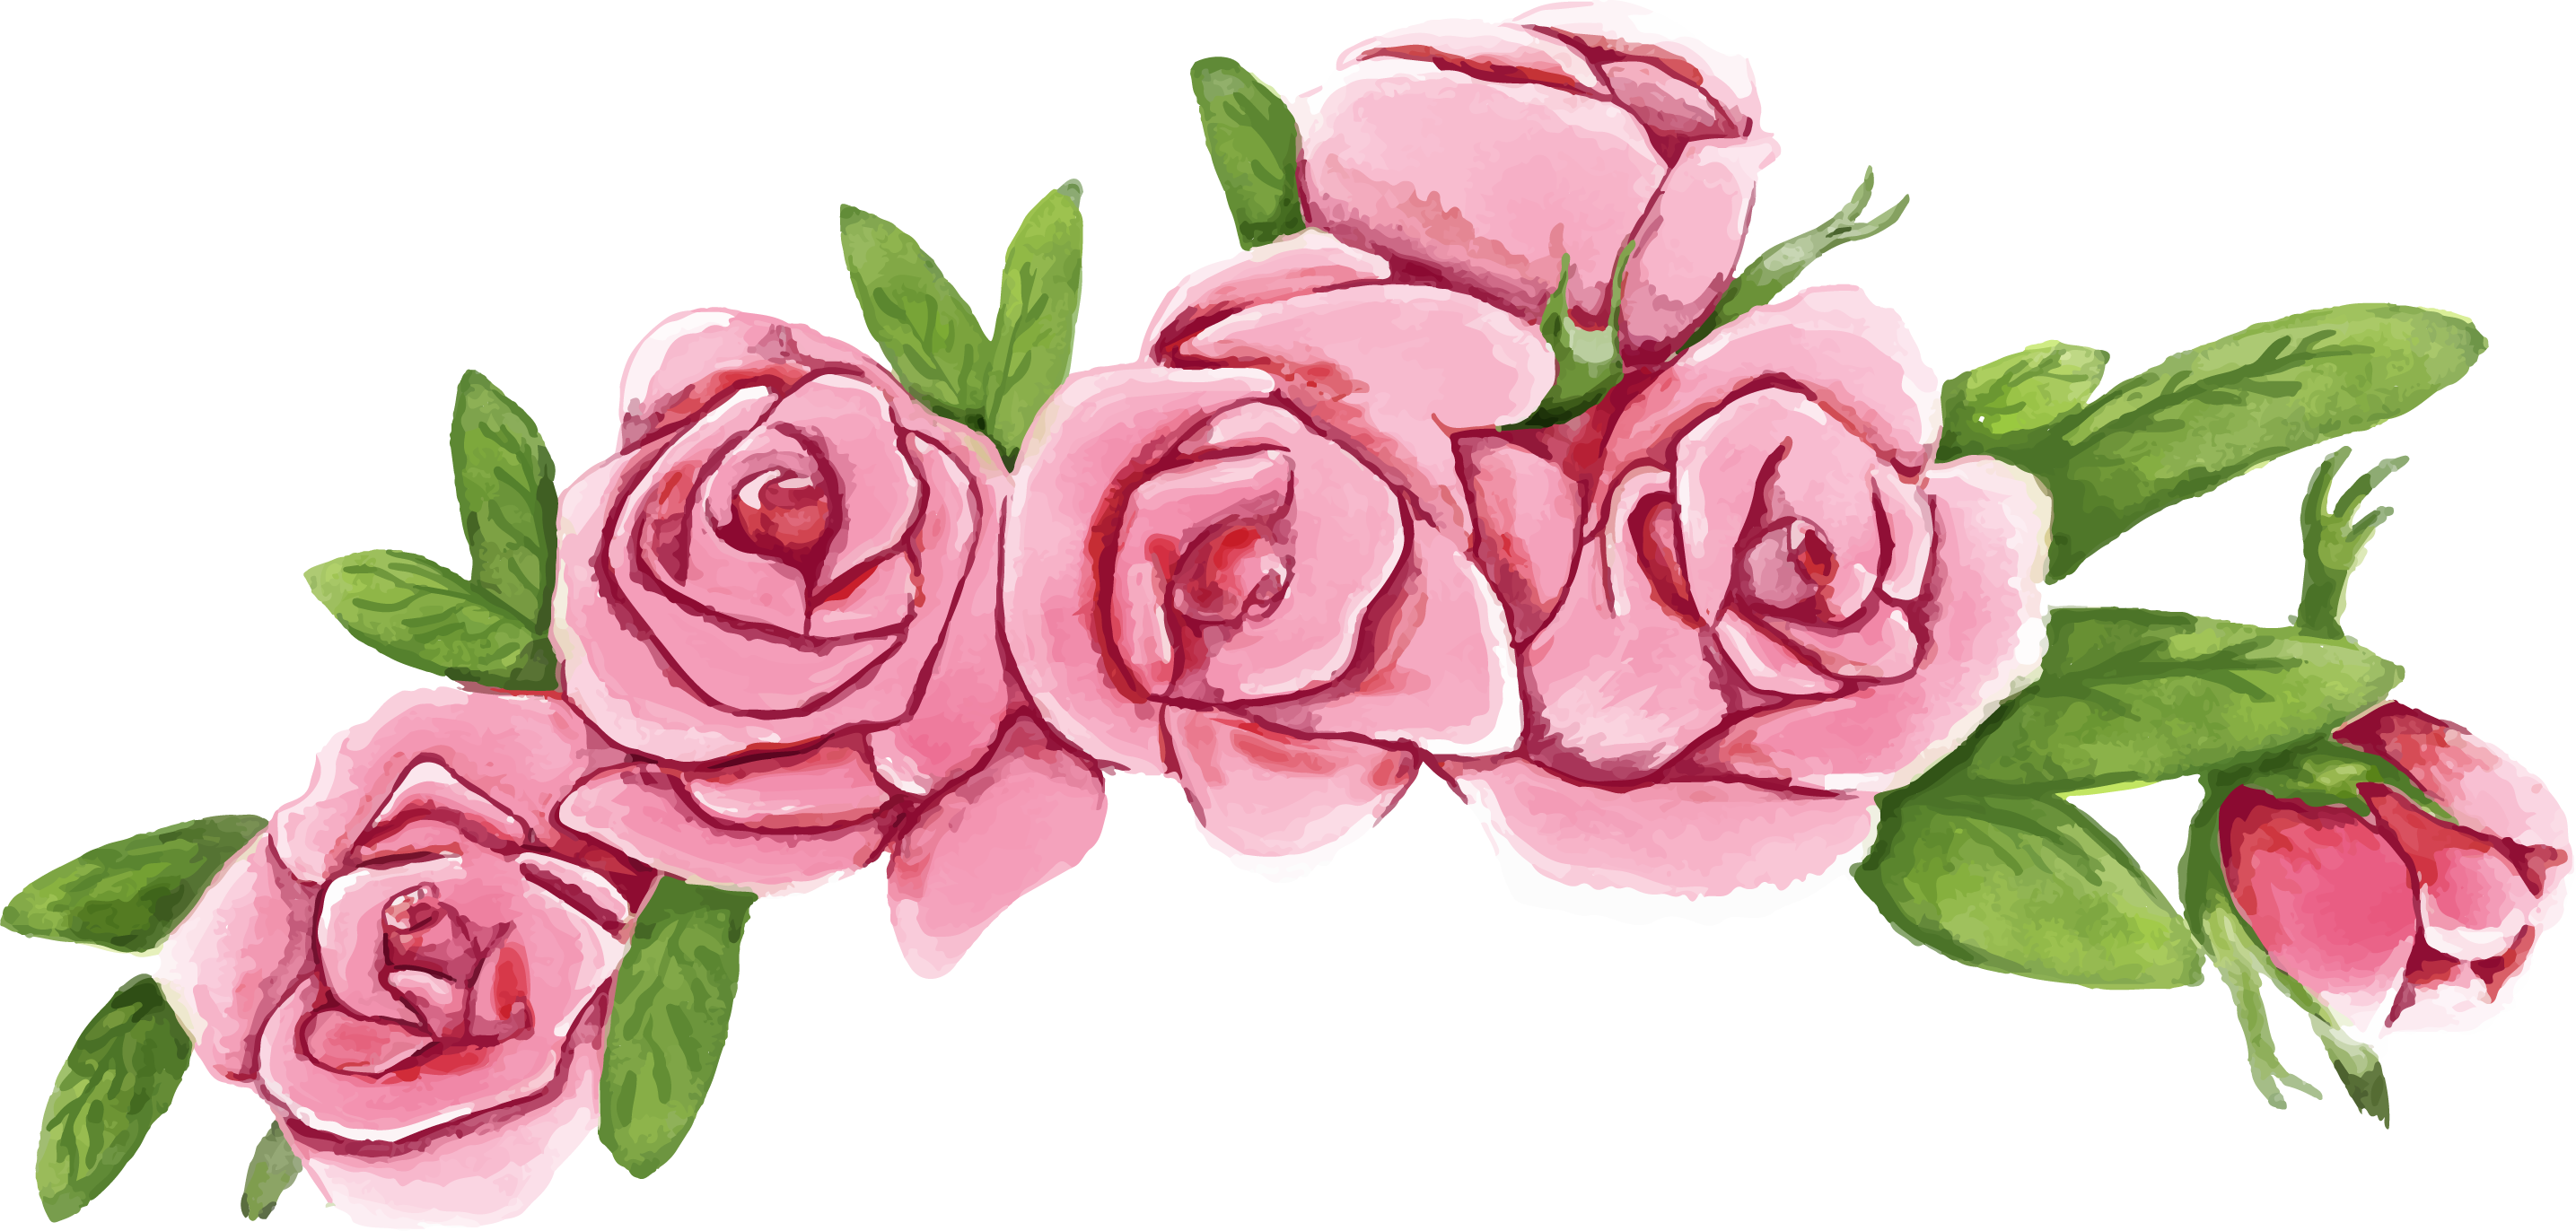 flowers, christmas wreath, roses png images for photoshop